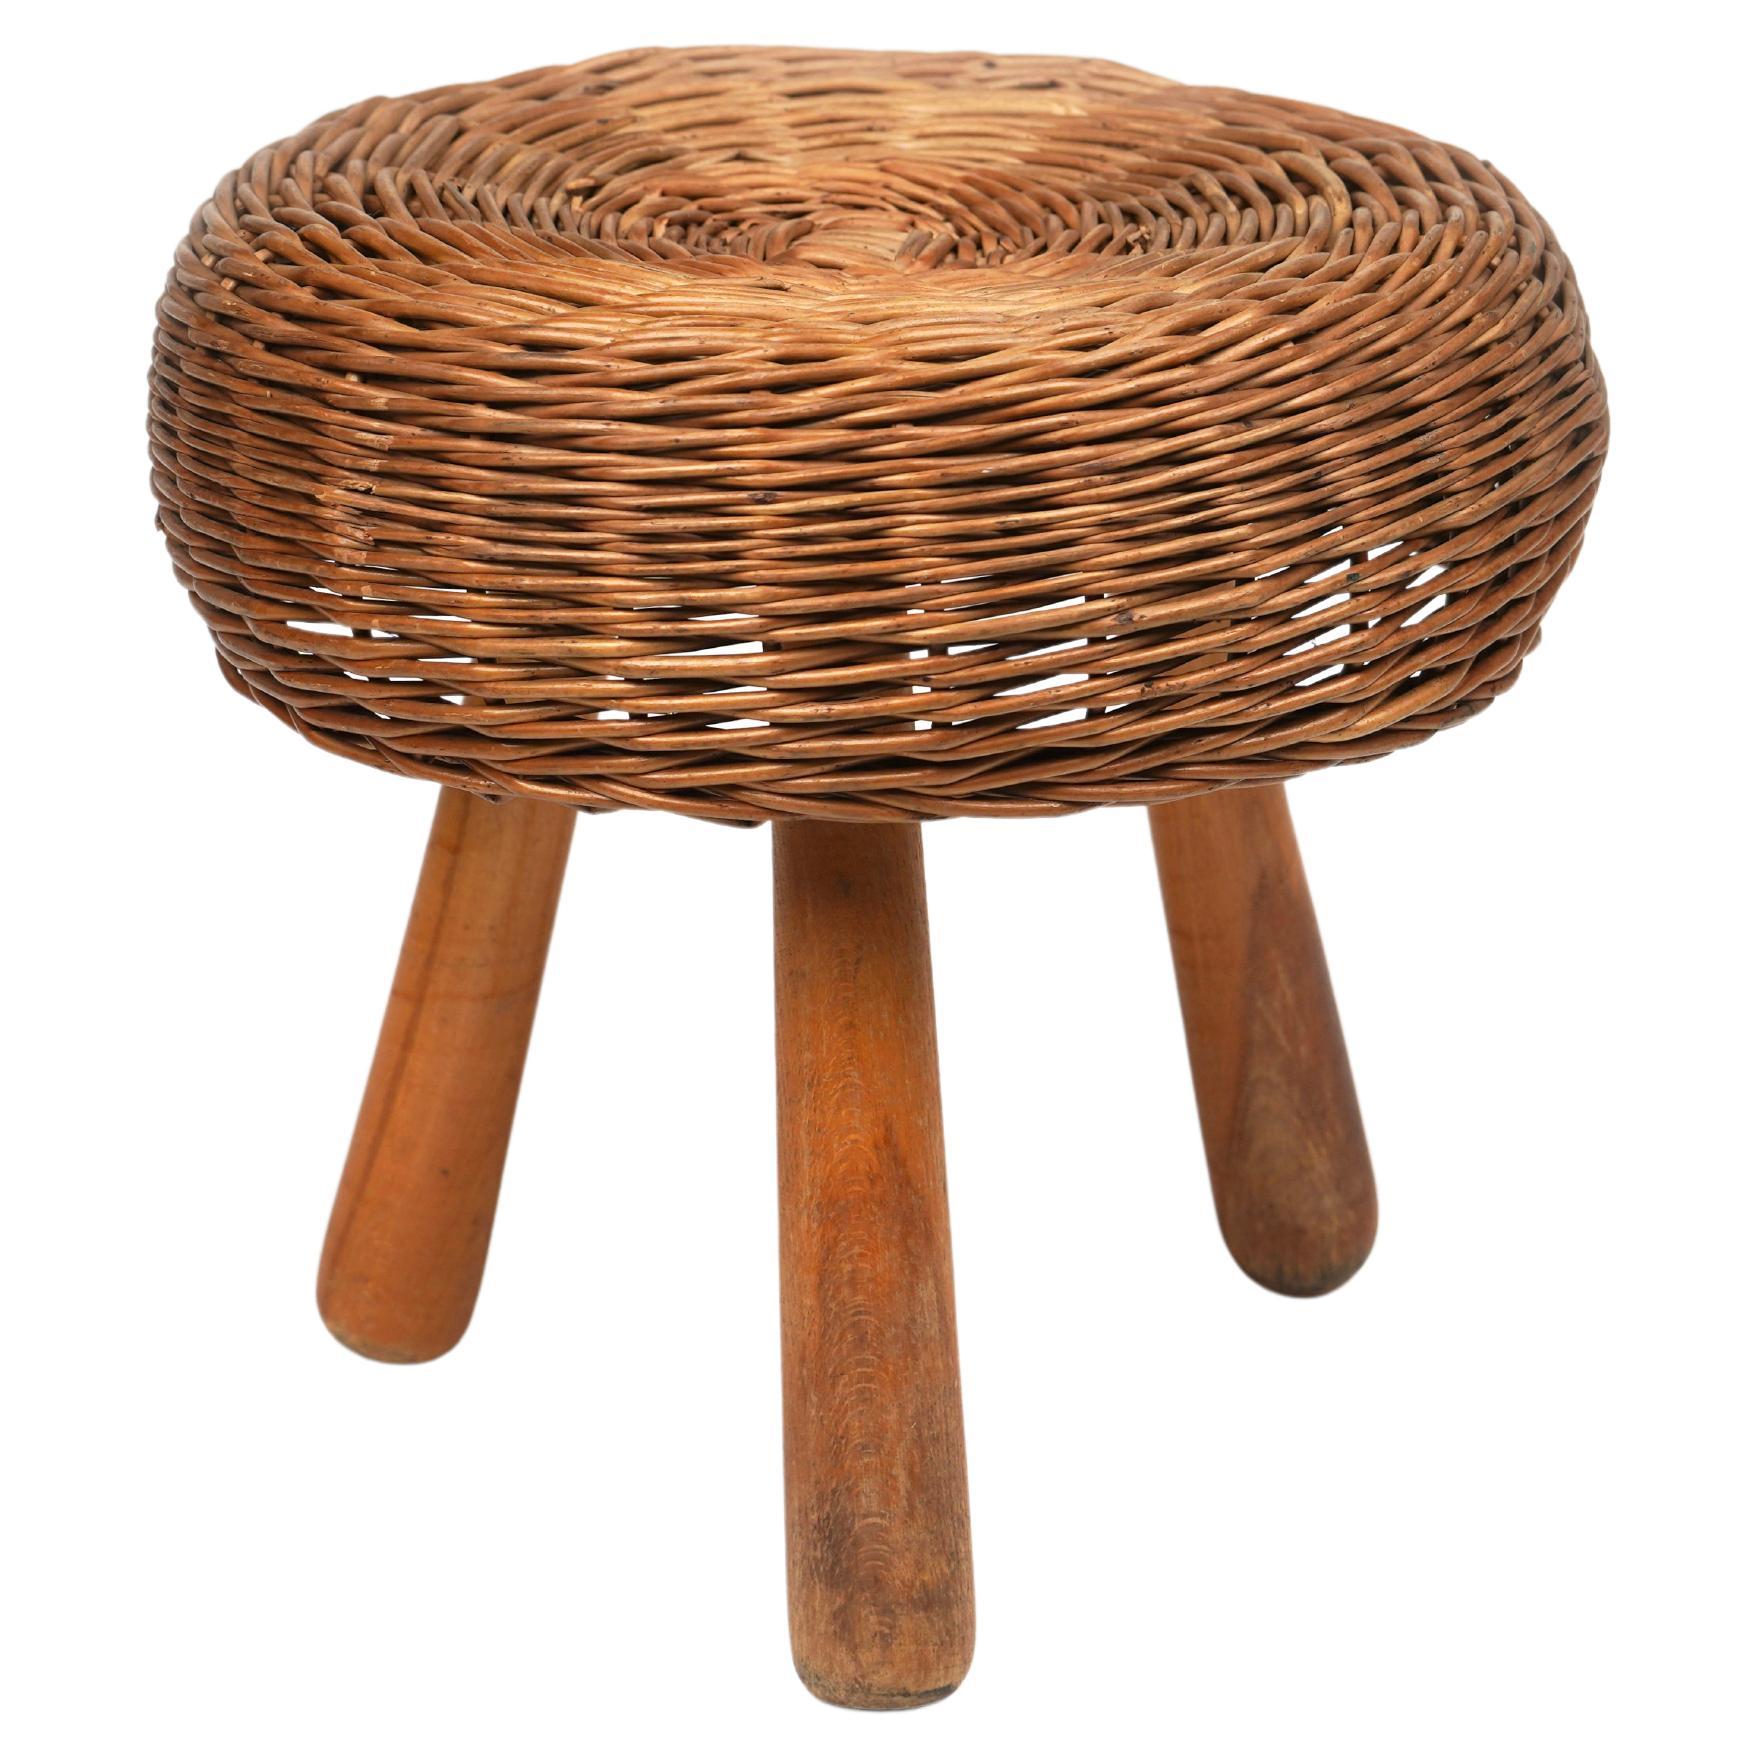 Mid-Century Modern Midcentury Wicker and Wood Tripod Stool by Tony Paul, United States, 1950s For Sale